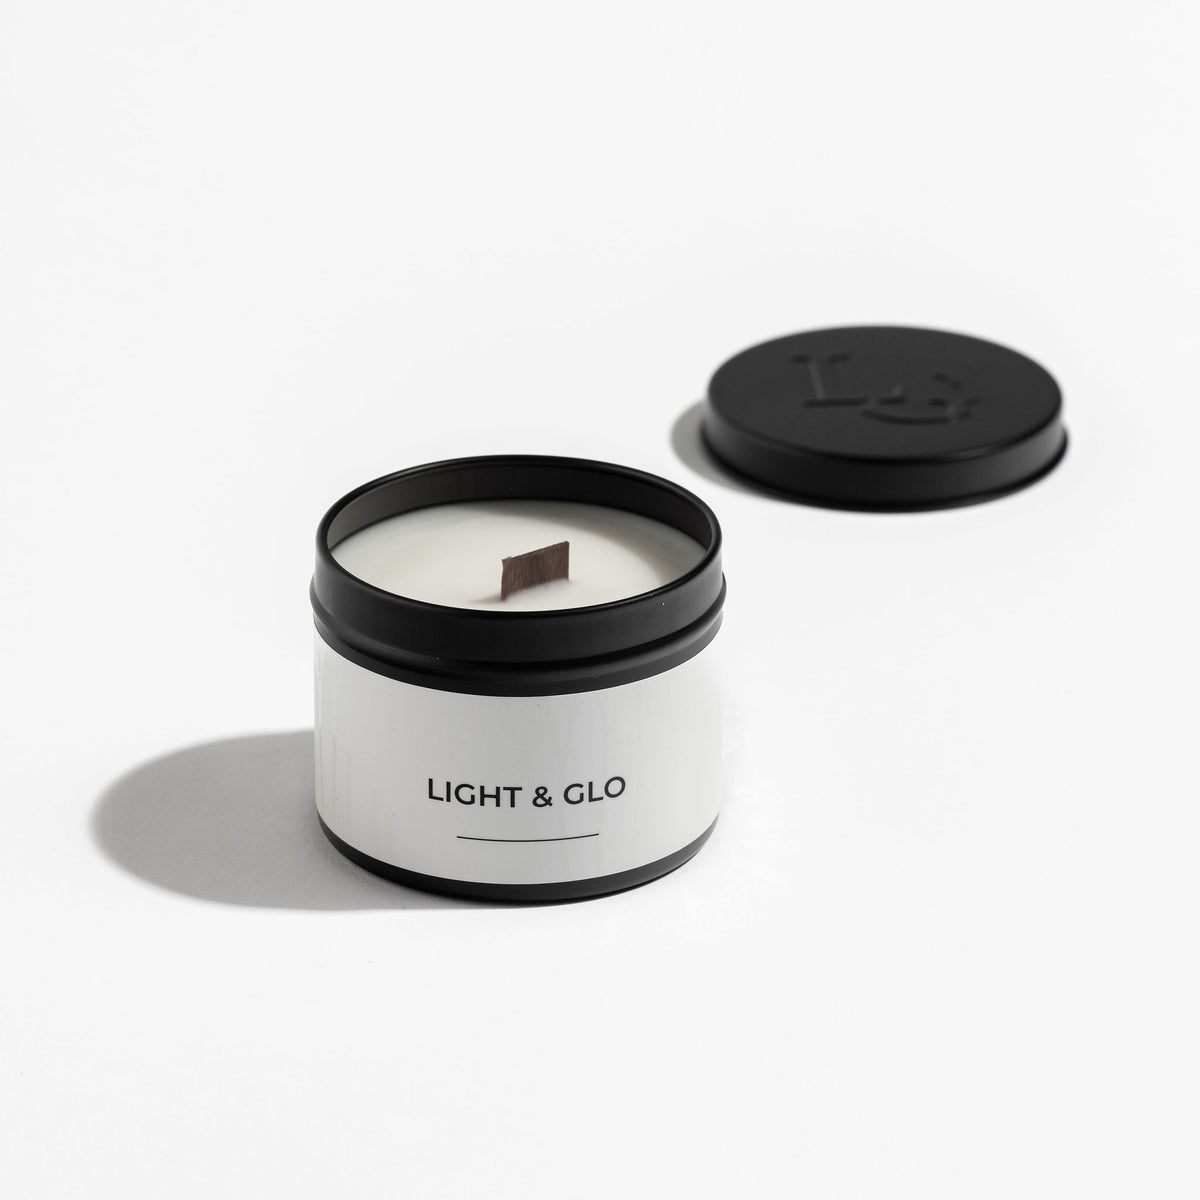 Tiger Lily &amp; Patchouli - Monochrome Travel Candle | Luxury Candles &amp; Home Fragrances by Light + Glo